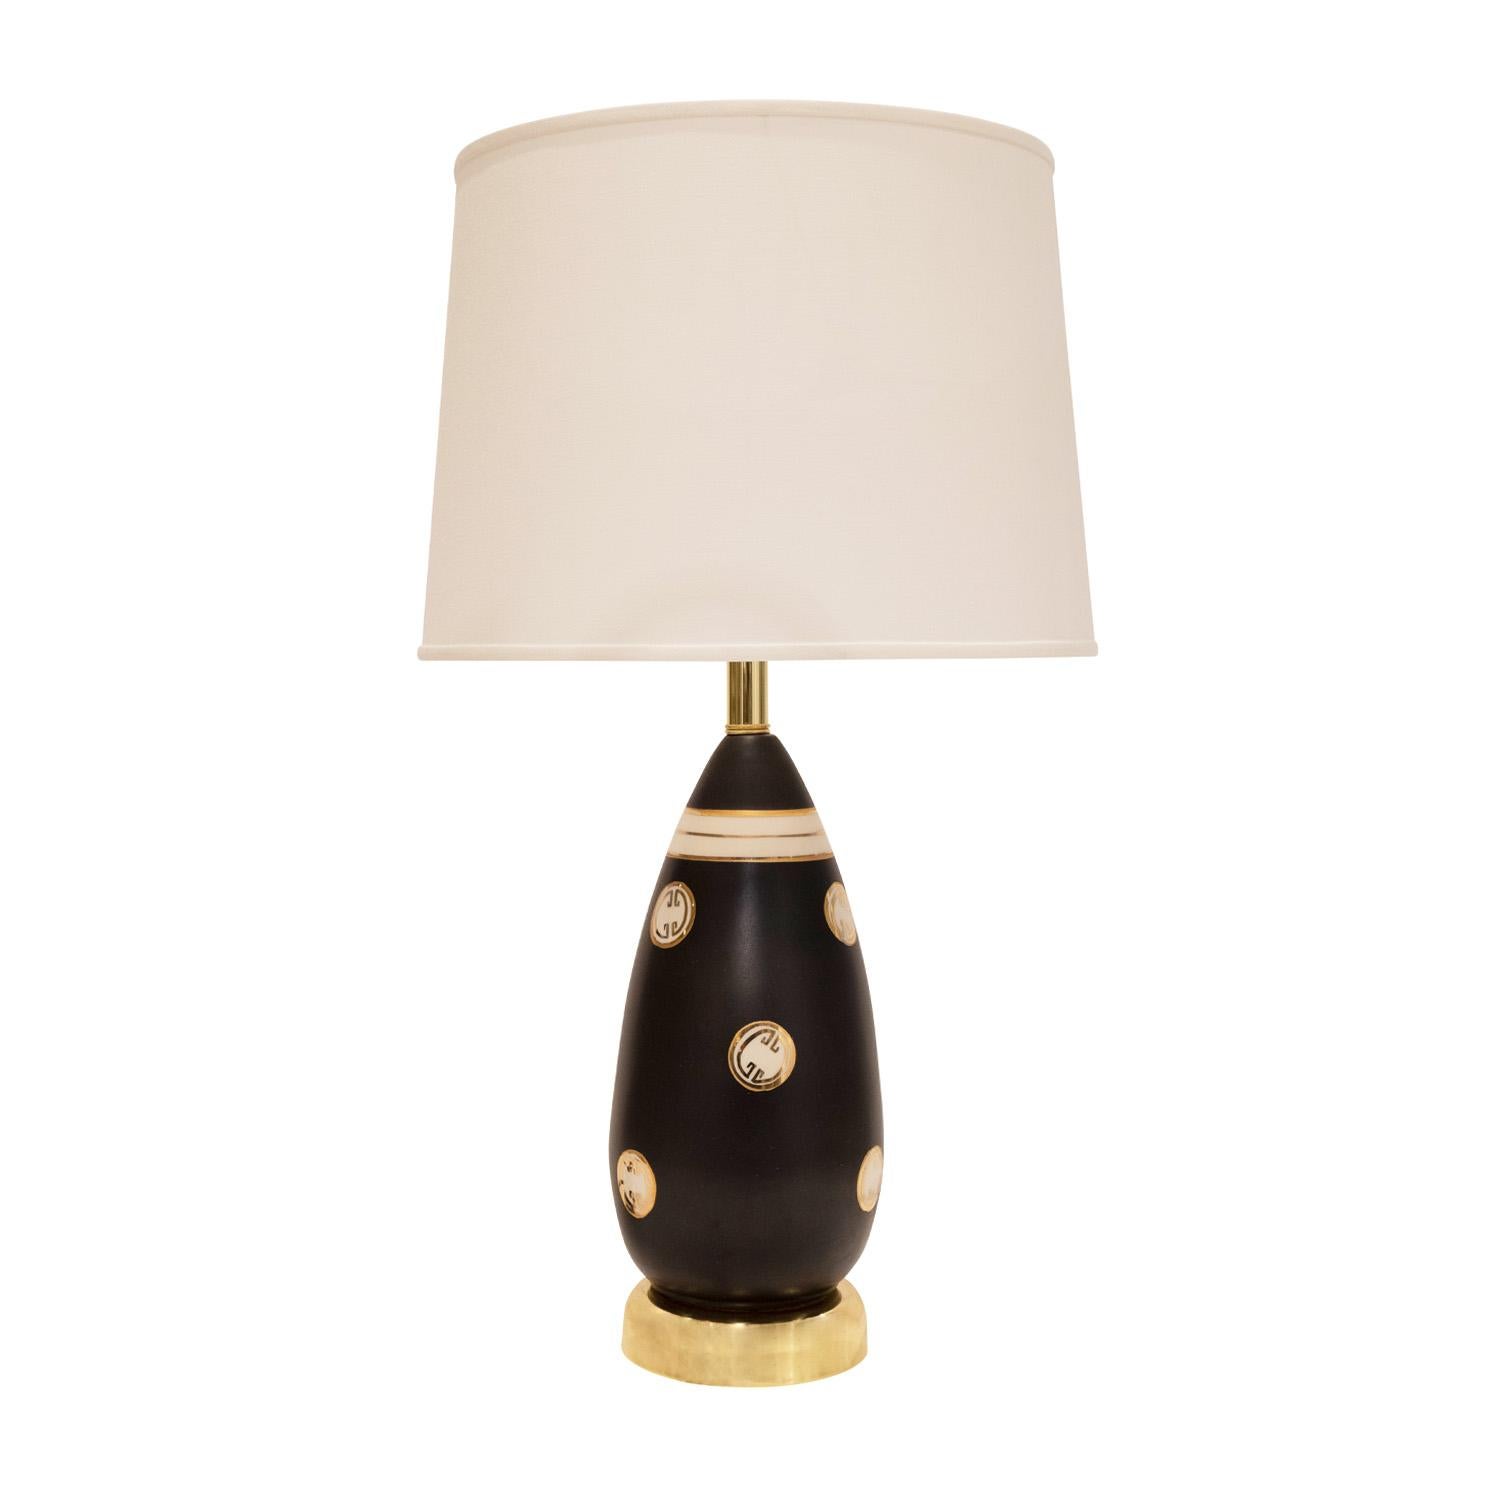 Mid-Century Modern Chic Artisan Porcelain Table Lamp with Gold Medallions, 1960s For Sale